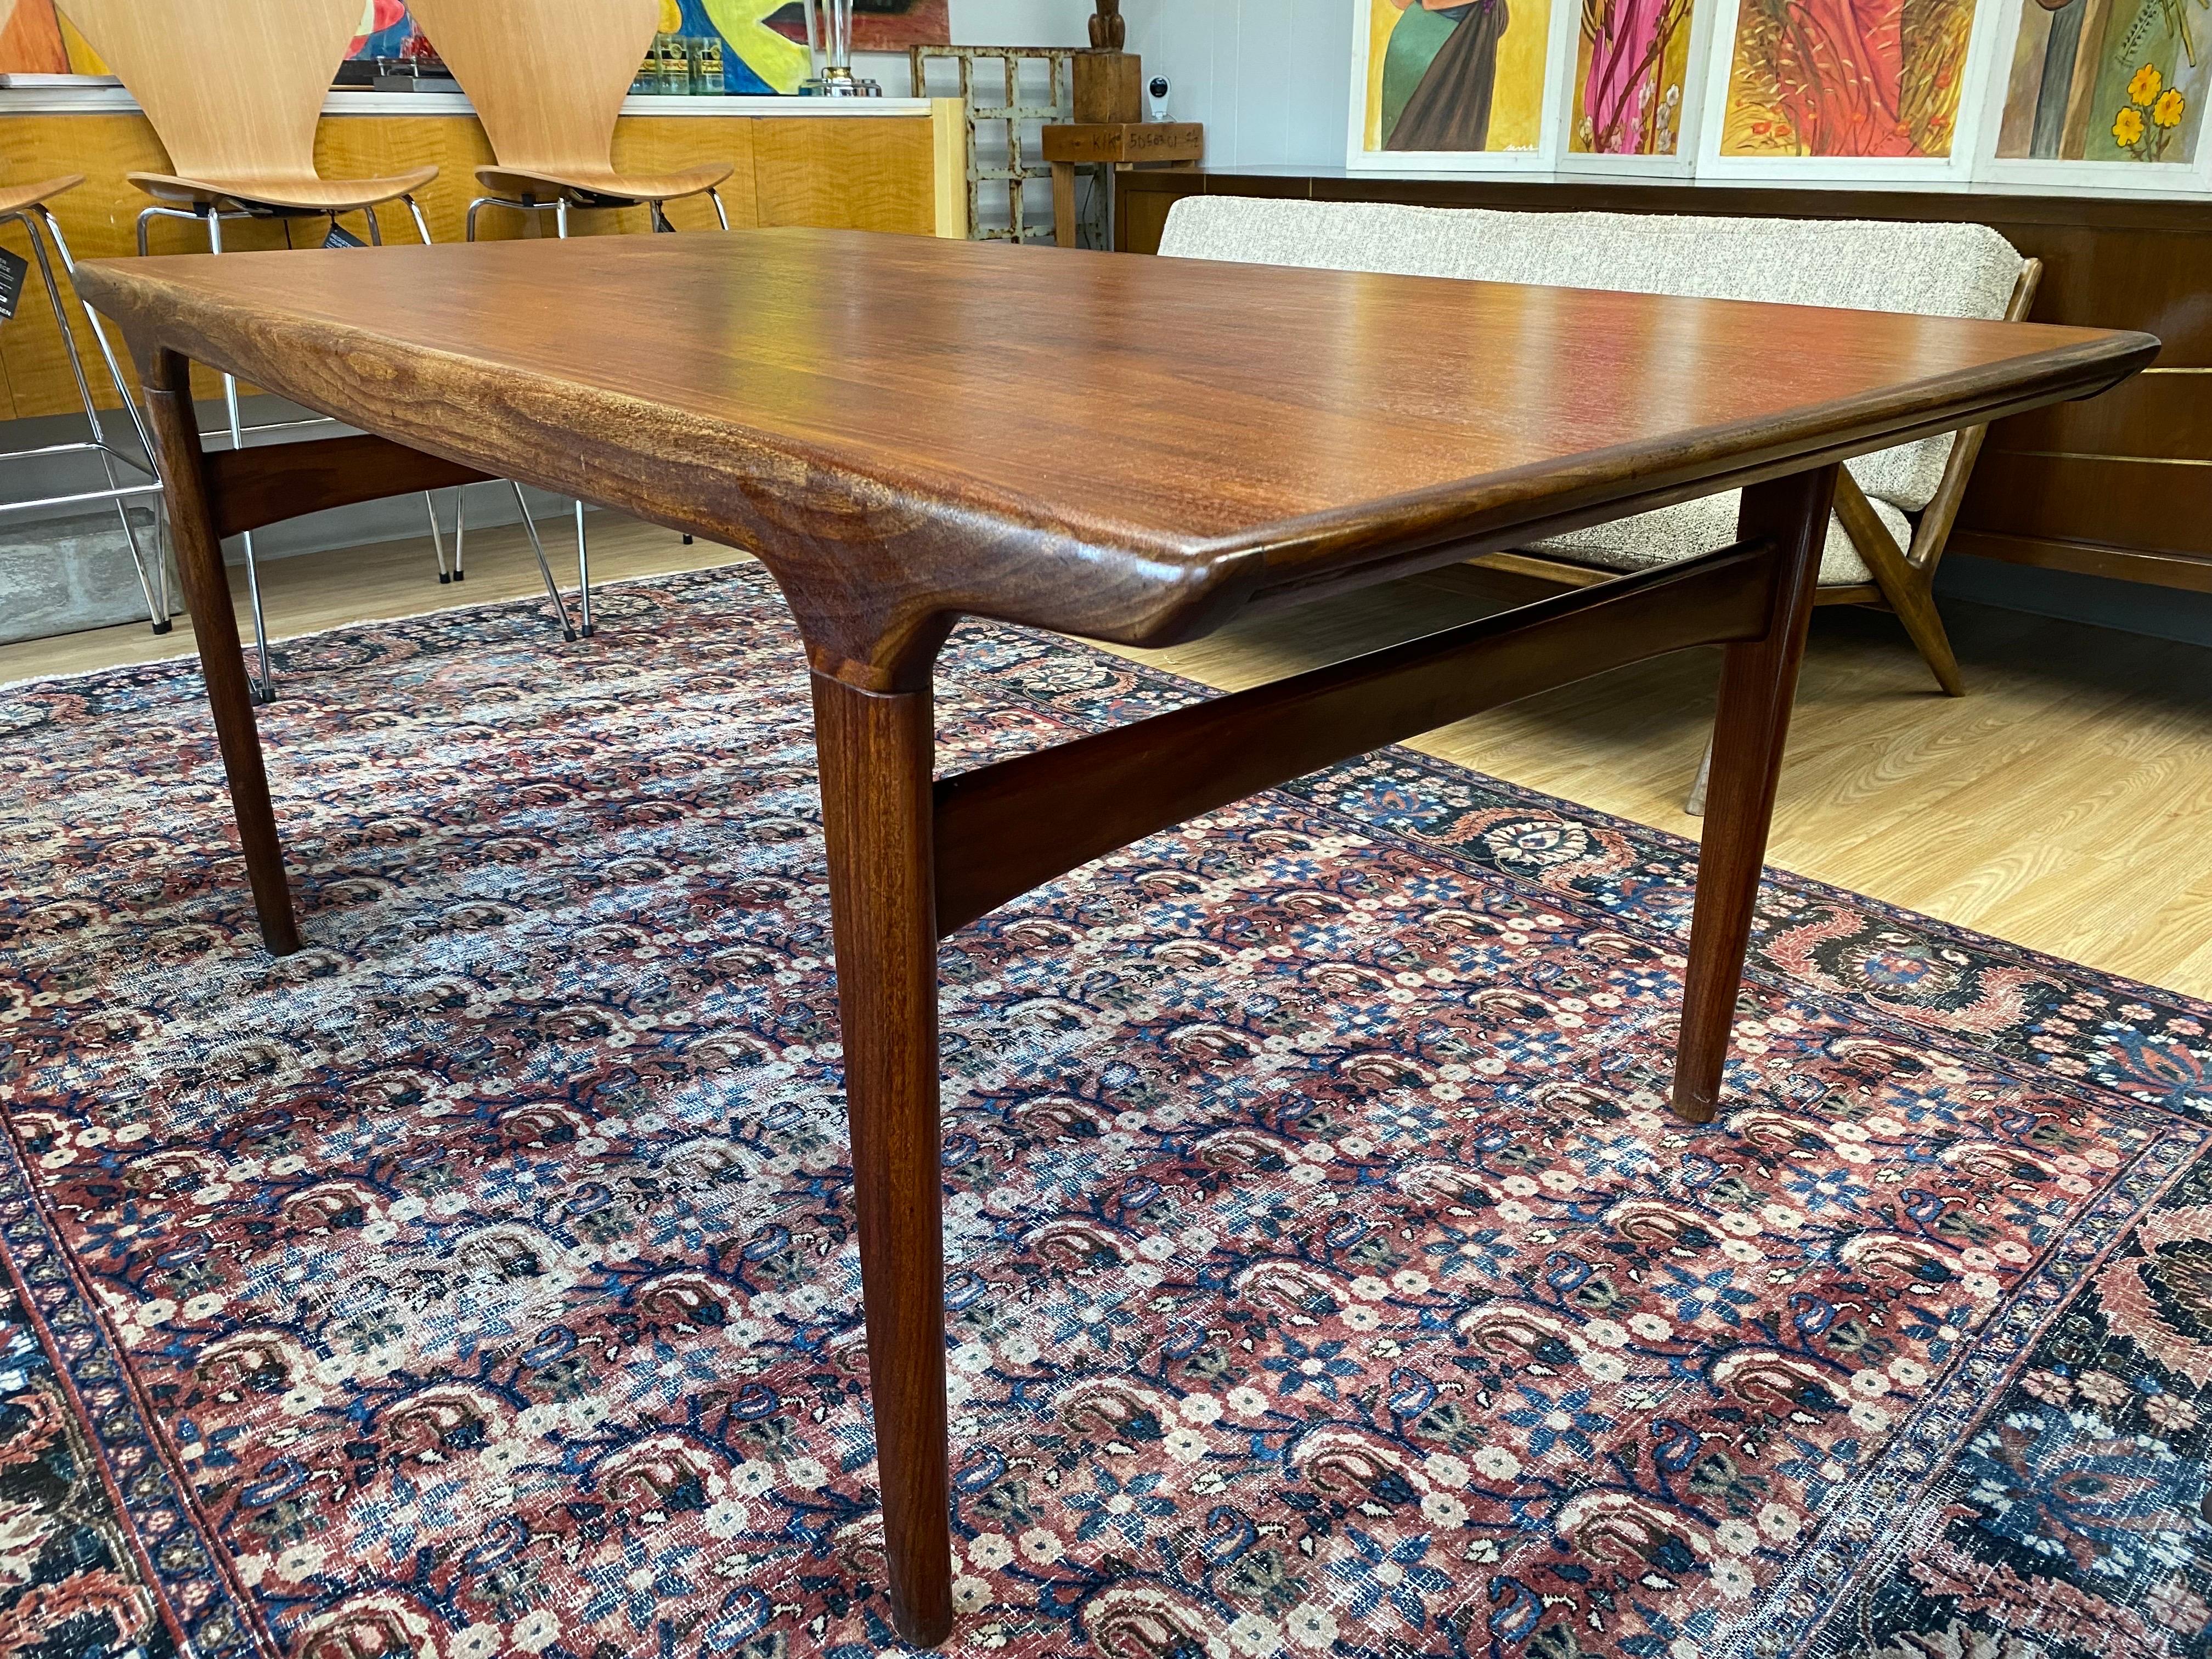 Danish modern teak dining table designed by Johannes Andersen, circa 1960s. This beautiful mid-century dining table features sculpted solid teak legs and a hidden extendable pull-out leaf underneath the table that can easily sit 8 people. This